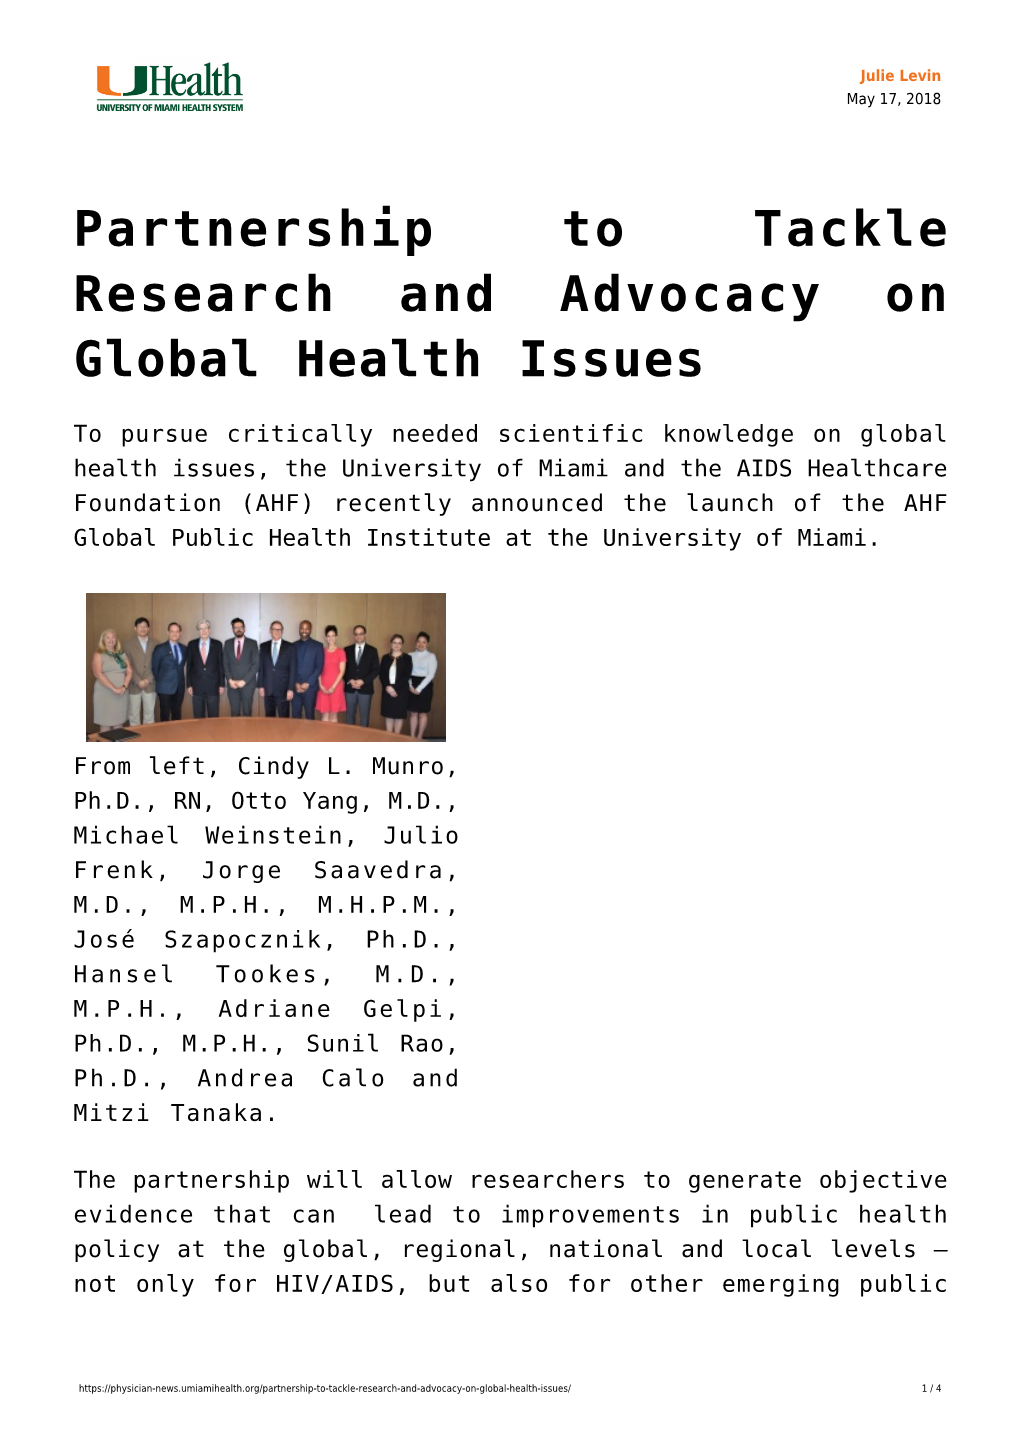 Partnership to Tackle Research and Advocacy on Global Health Issues